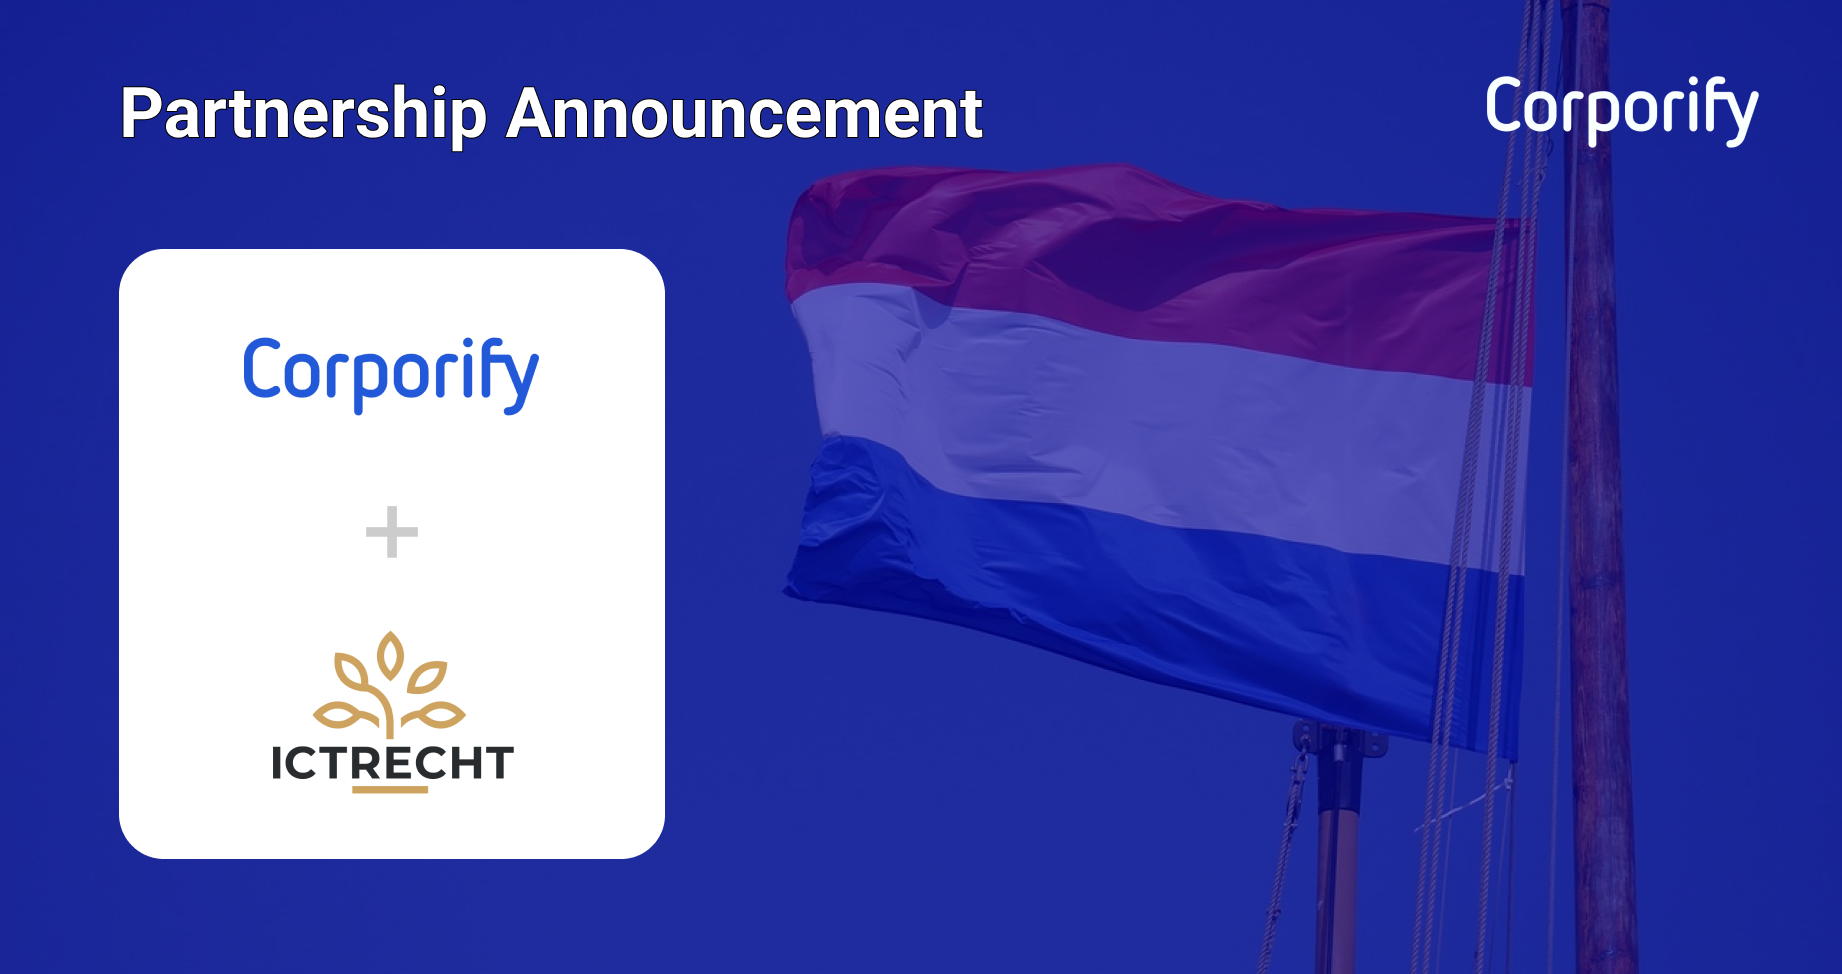 ICTRecht & Corporify are teaming up